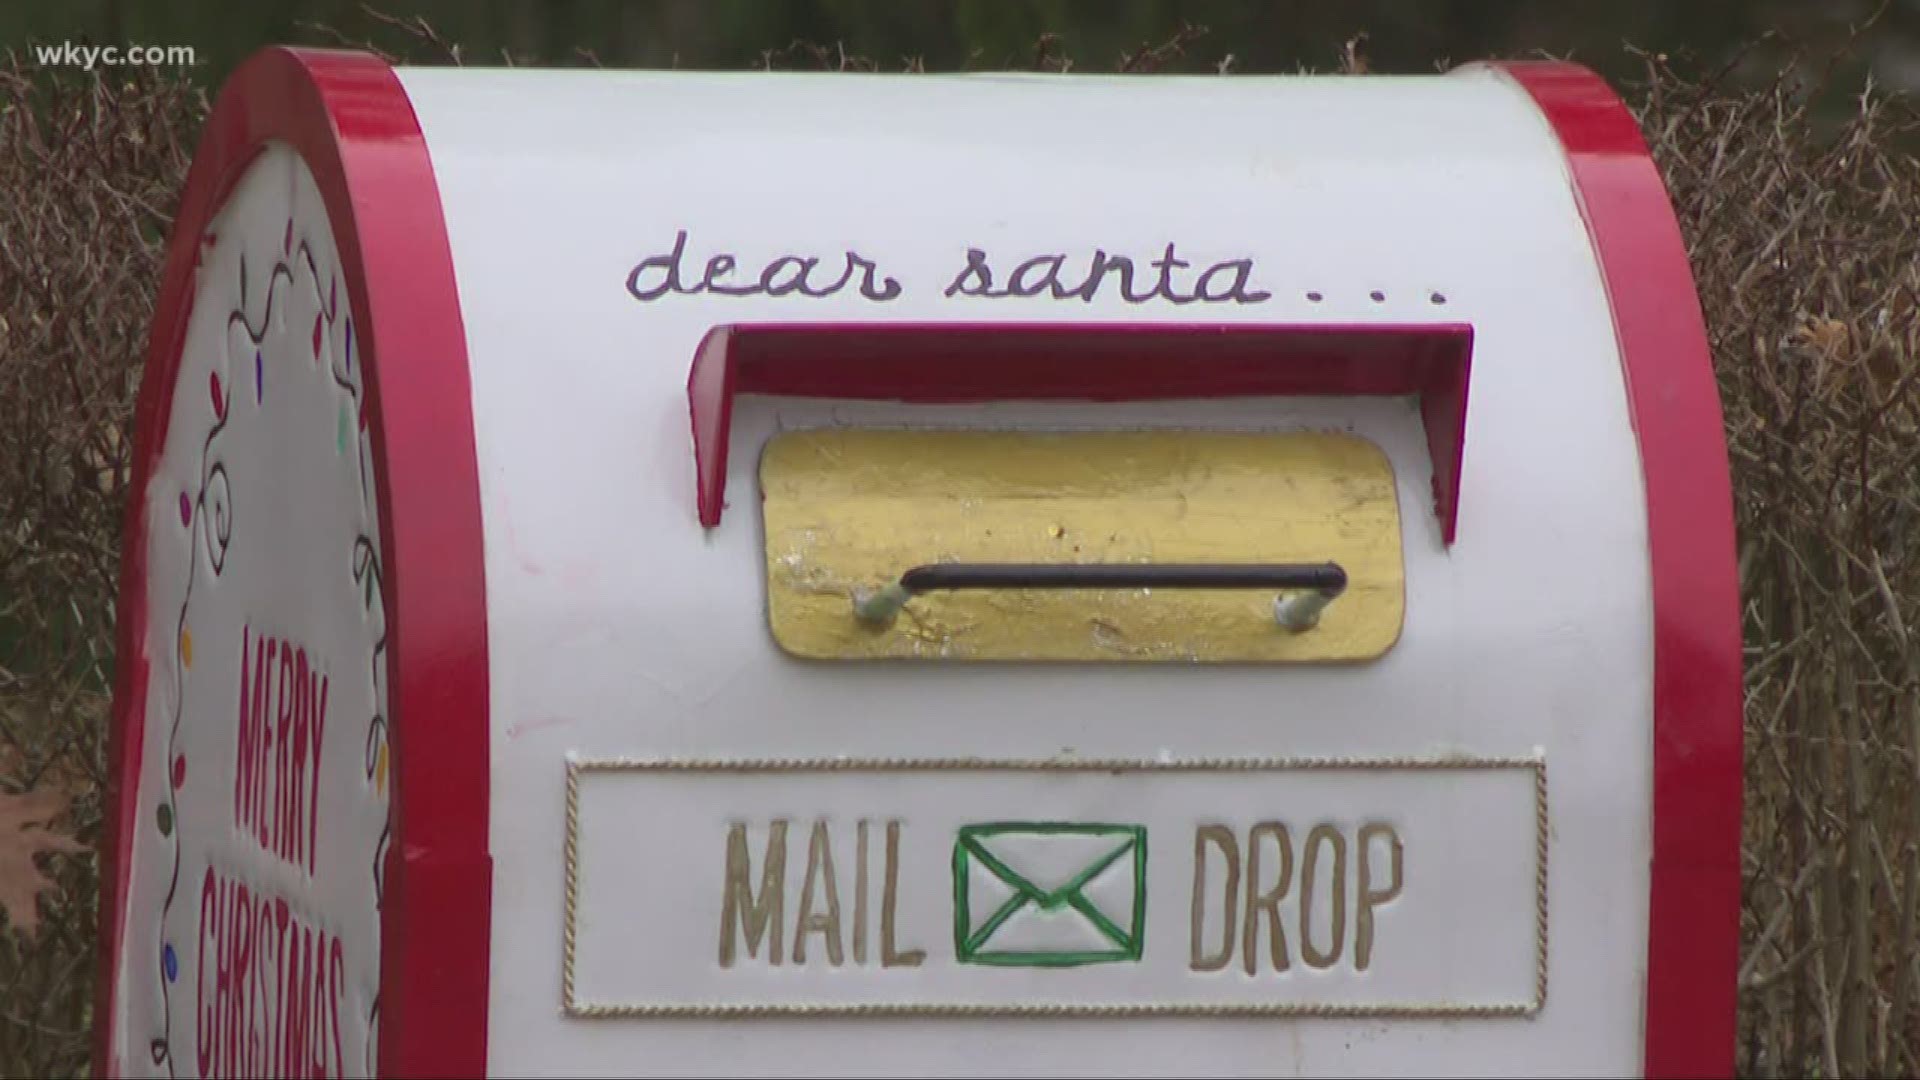 For the past 4 years, the people of Hudson have been experiencing the holiday magic in the form of a mailbox. It's all to give children a direct line to Santa Claus.